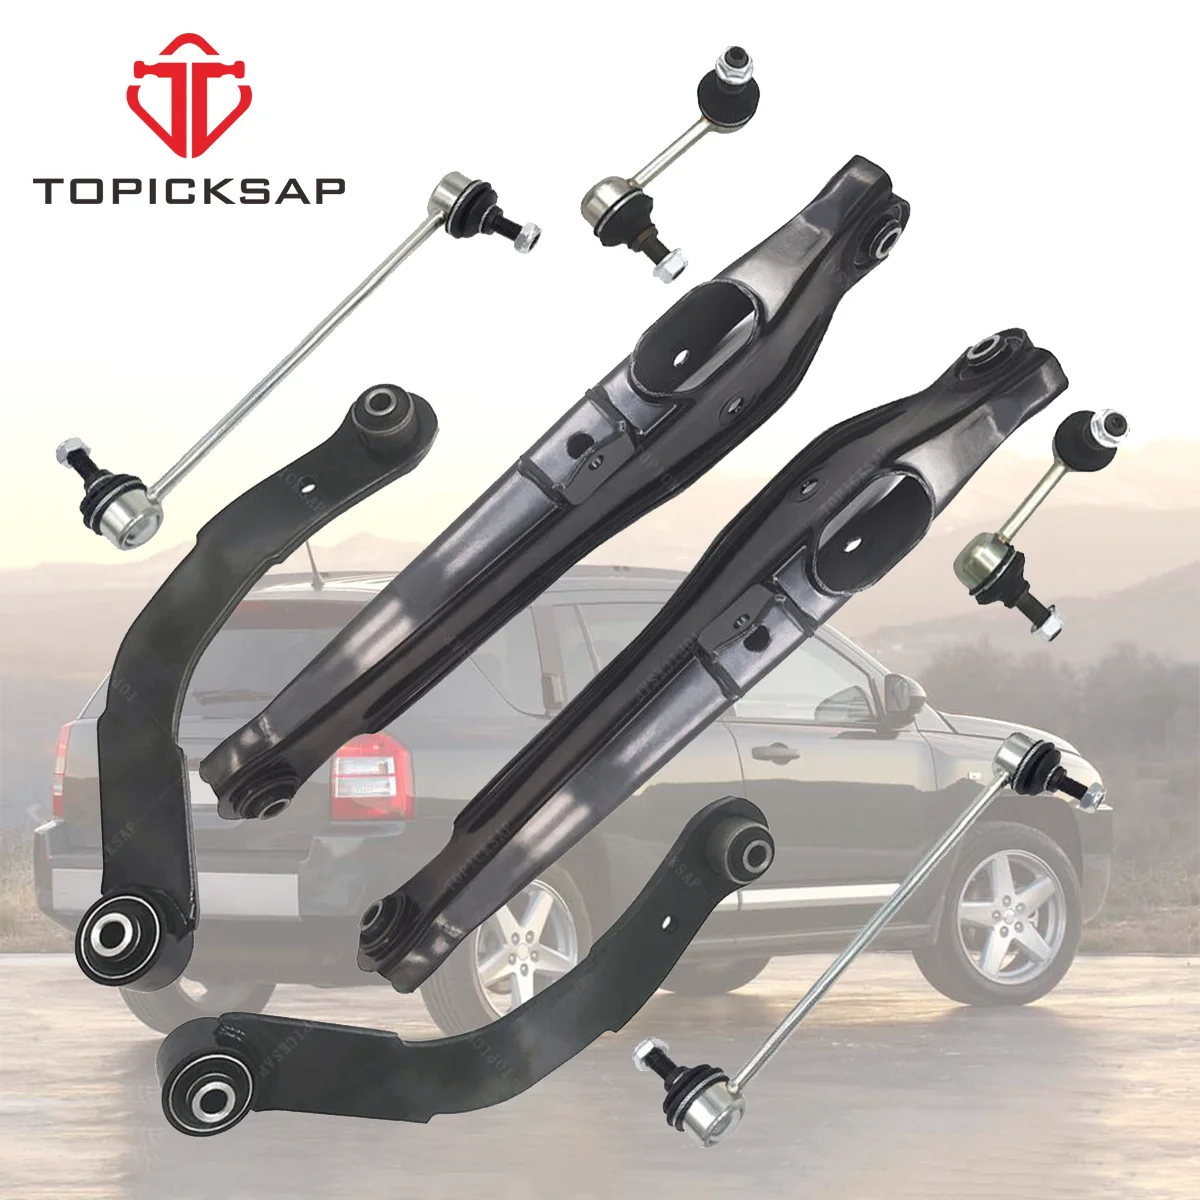 

TOPICKSAP 8PC Front Lower Rear Upper Control Arm Stabilizer Sway Bar Links Kit for Jeep Compass Dodge Caliber 2007 2008 2009